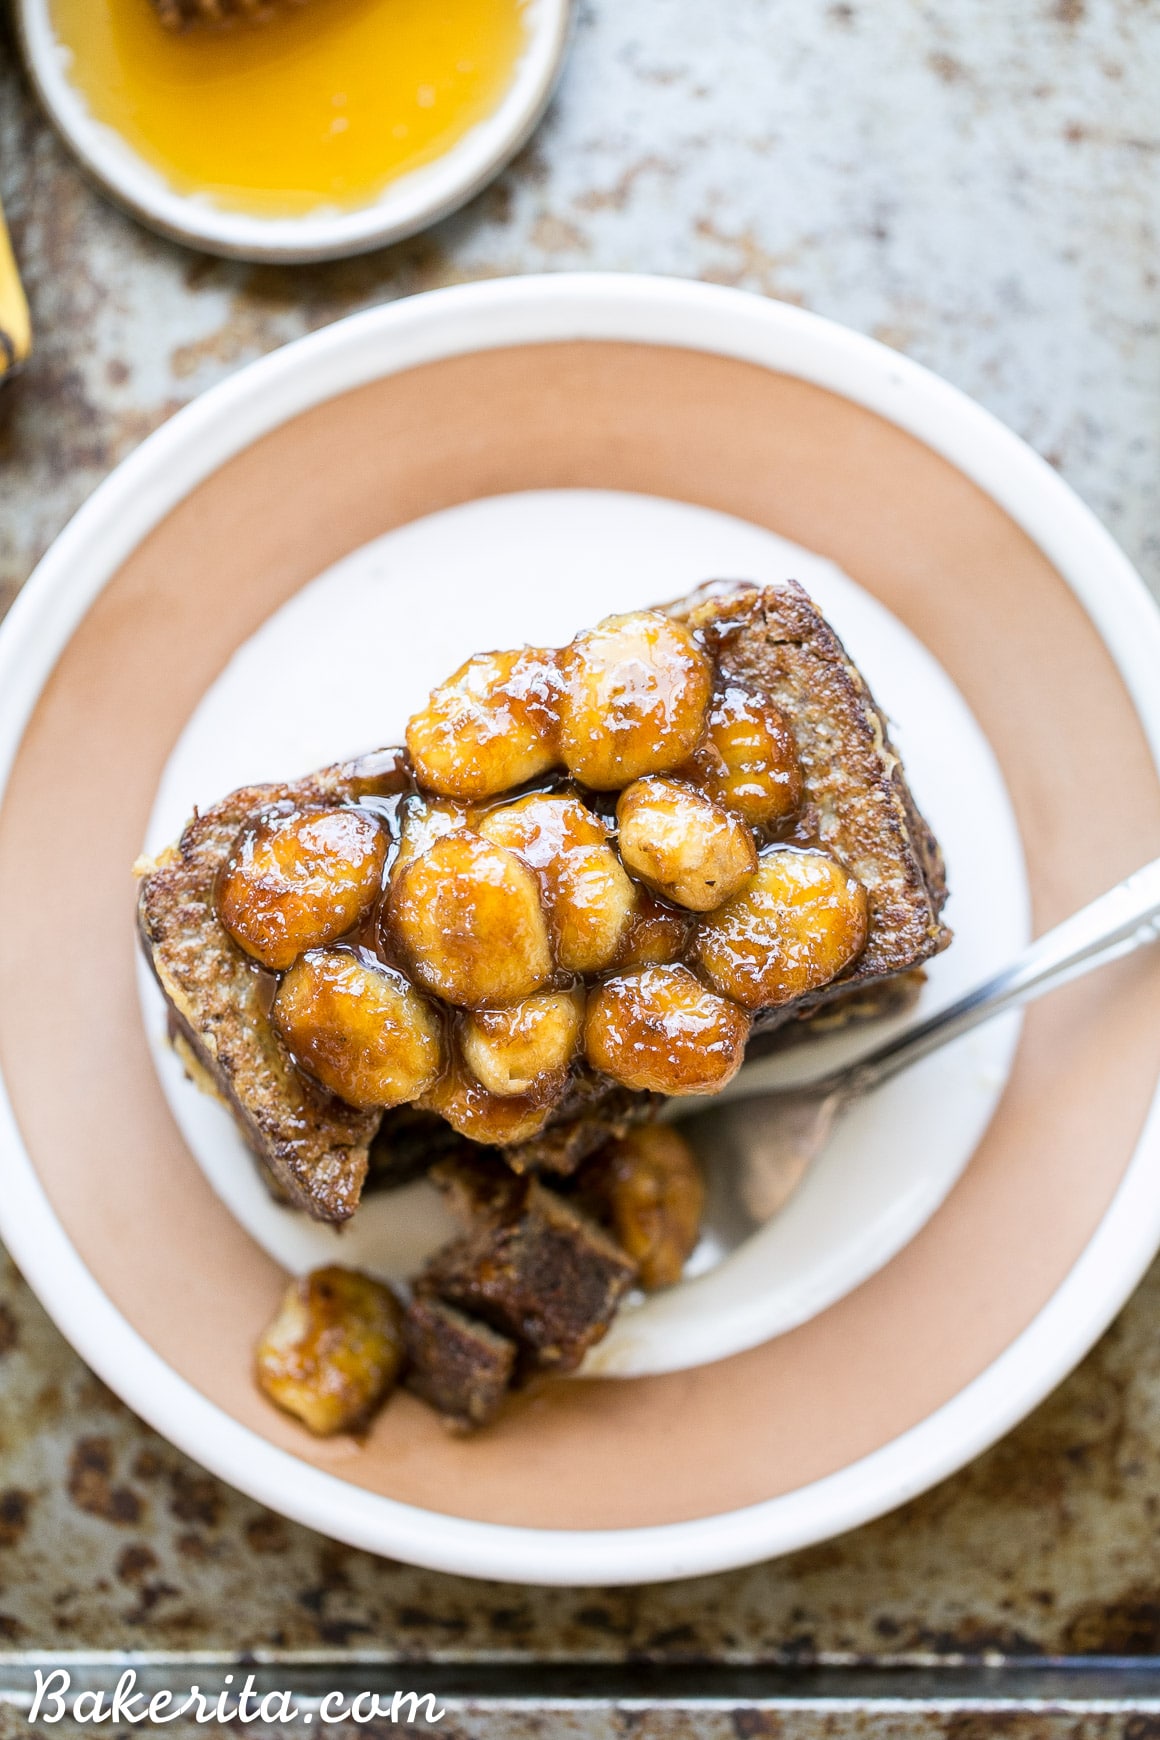 This Banana Bread French Toast is topped with caramelized bananas for a banana lover's delight! This gluten-free, Paleo, and dairy-free french toast is sure to satisfy your breakfast and brunch cravings.